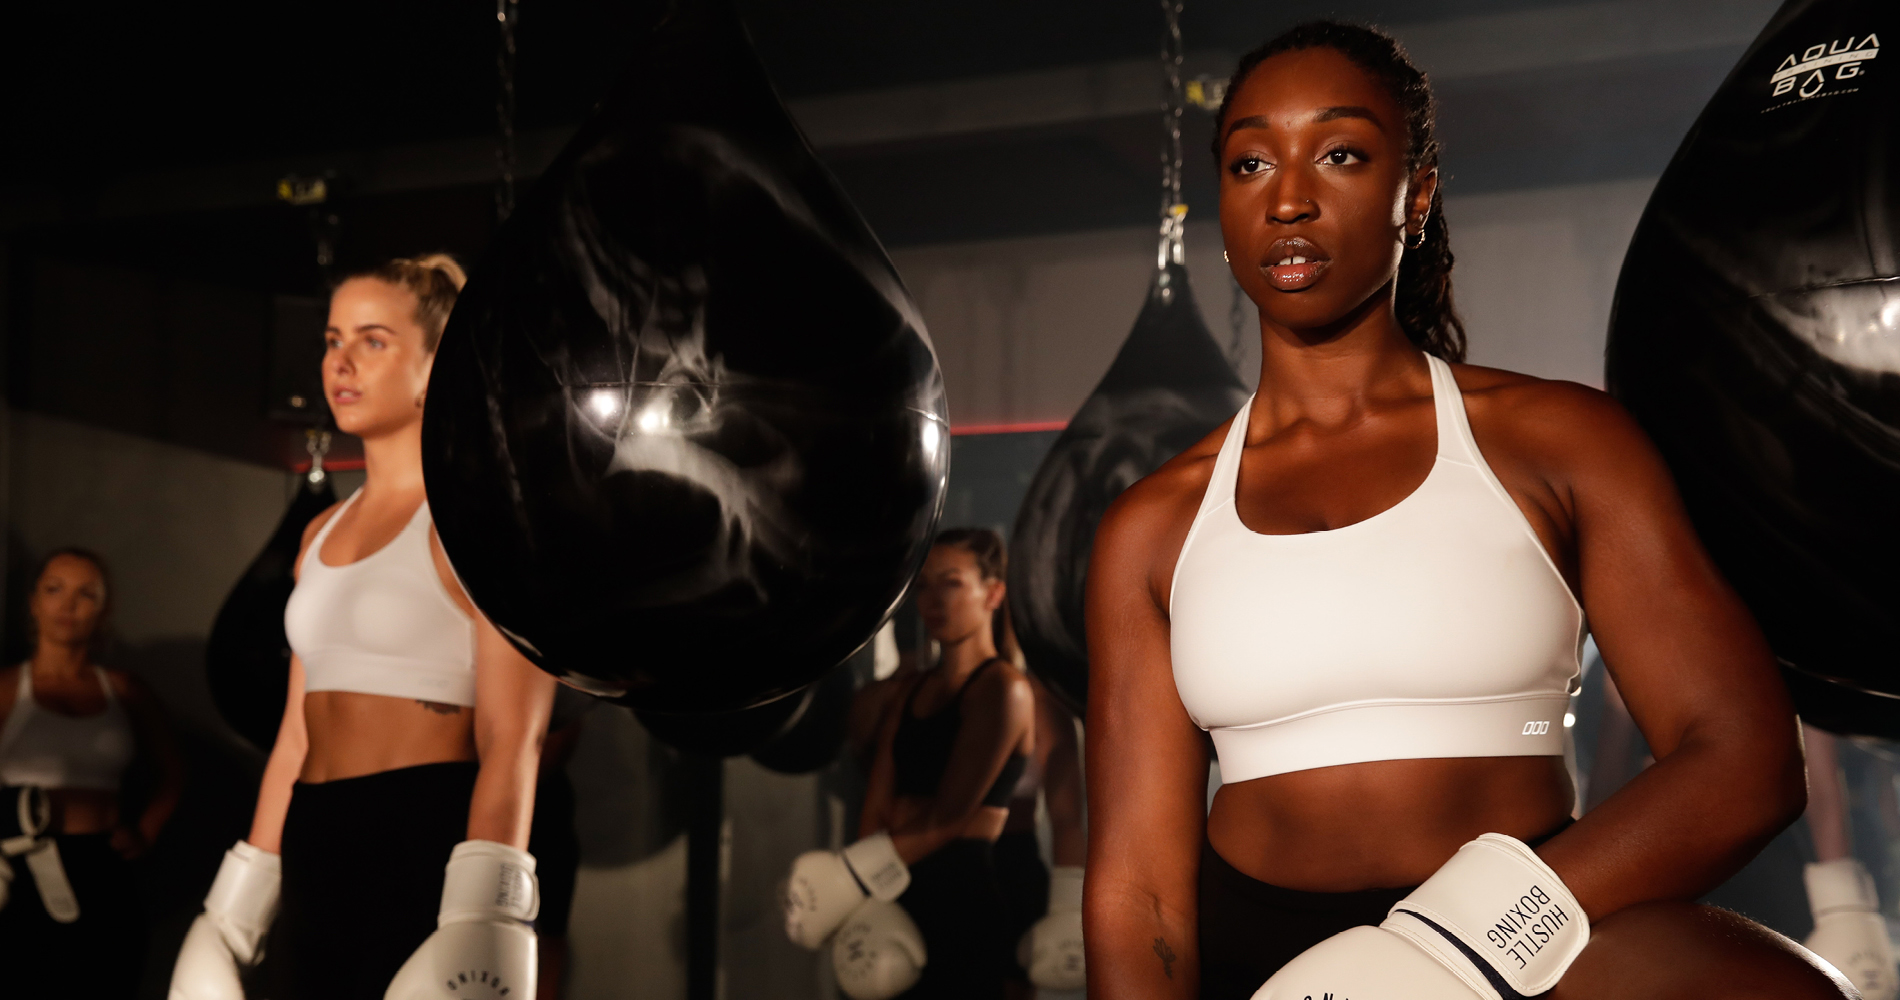 two women wearing white sports bras and boxing gloves